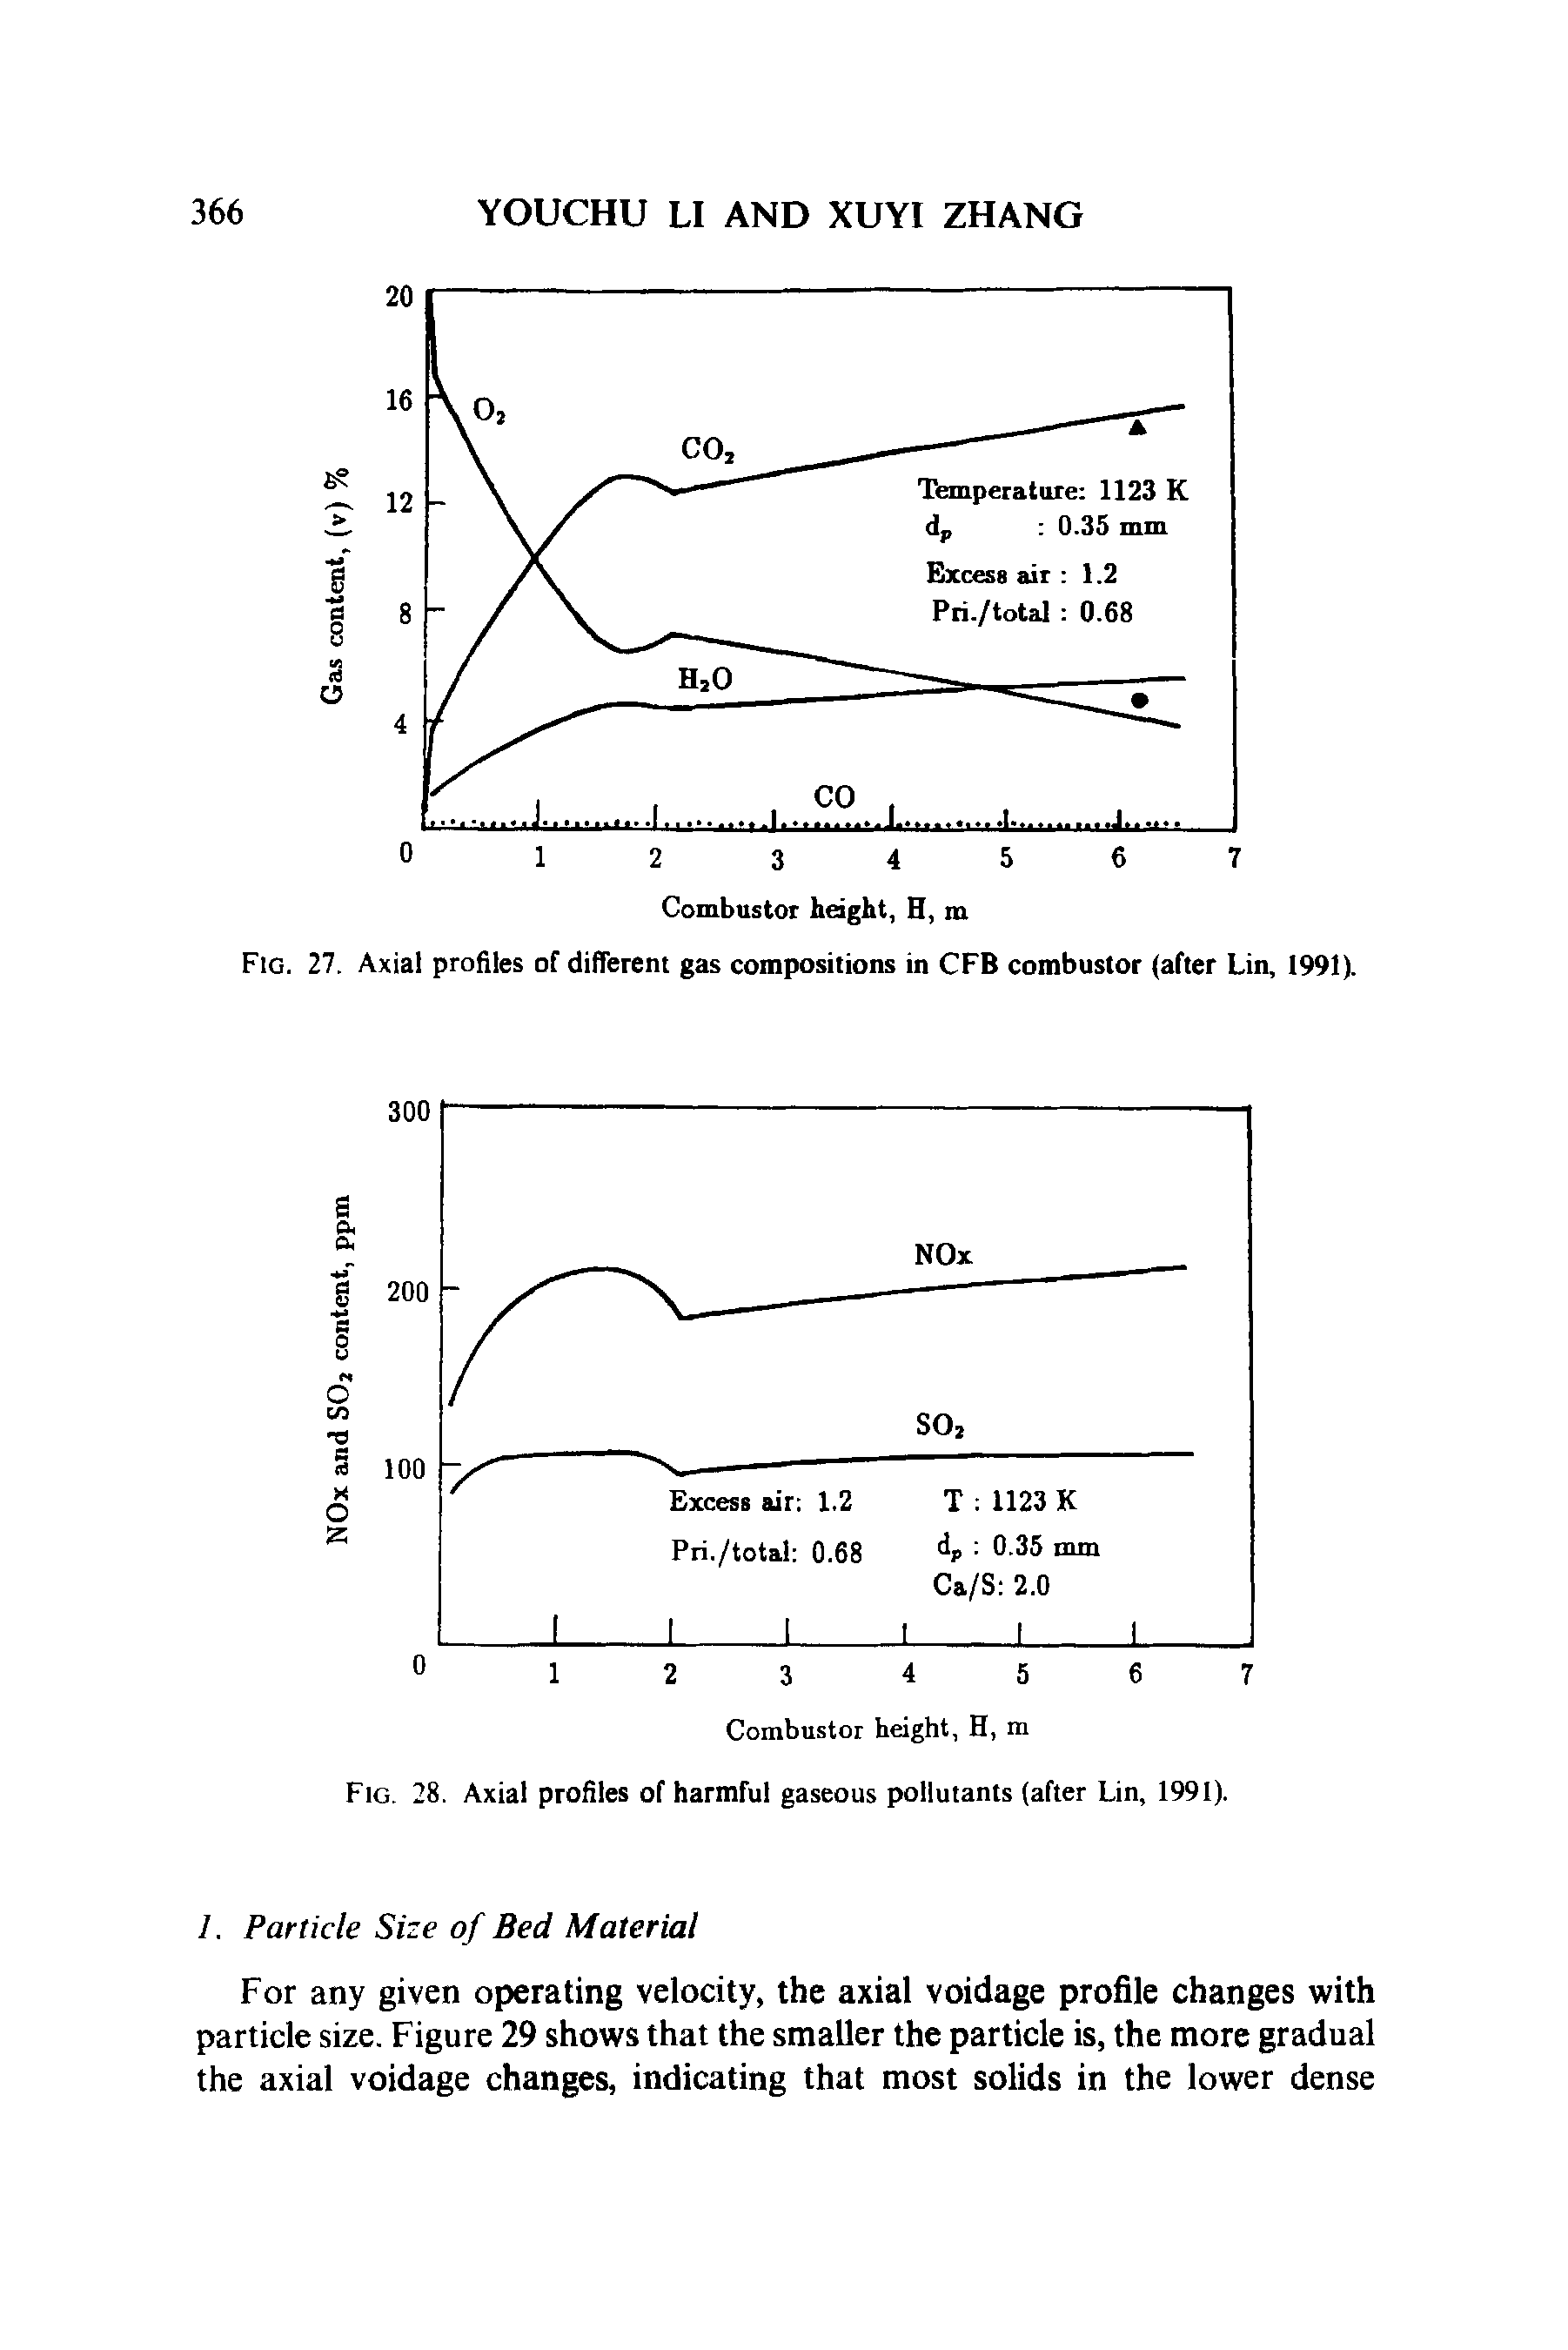 Fig. 27. Axial profiles of different gas compositions in CFB combustor (after Lin, 1991).